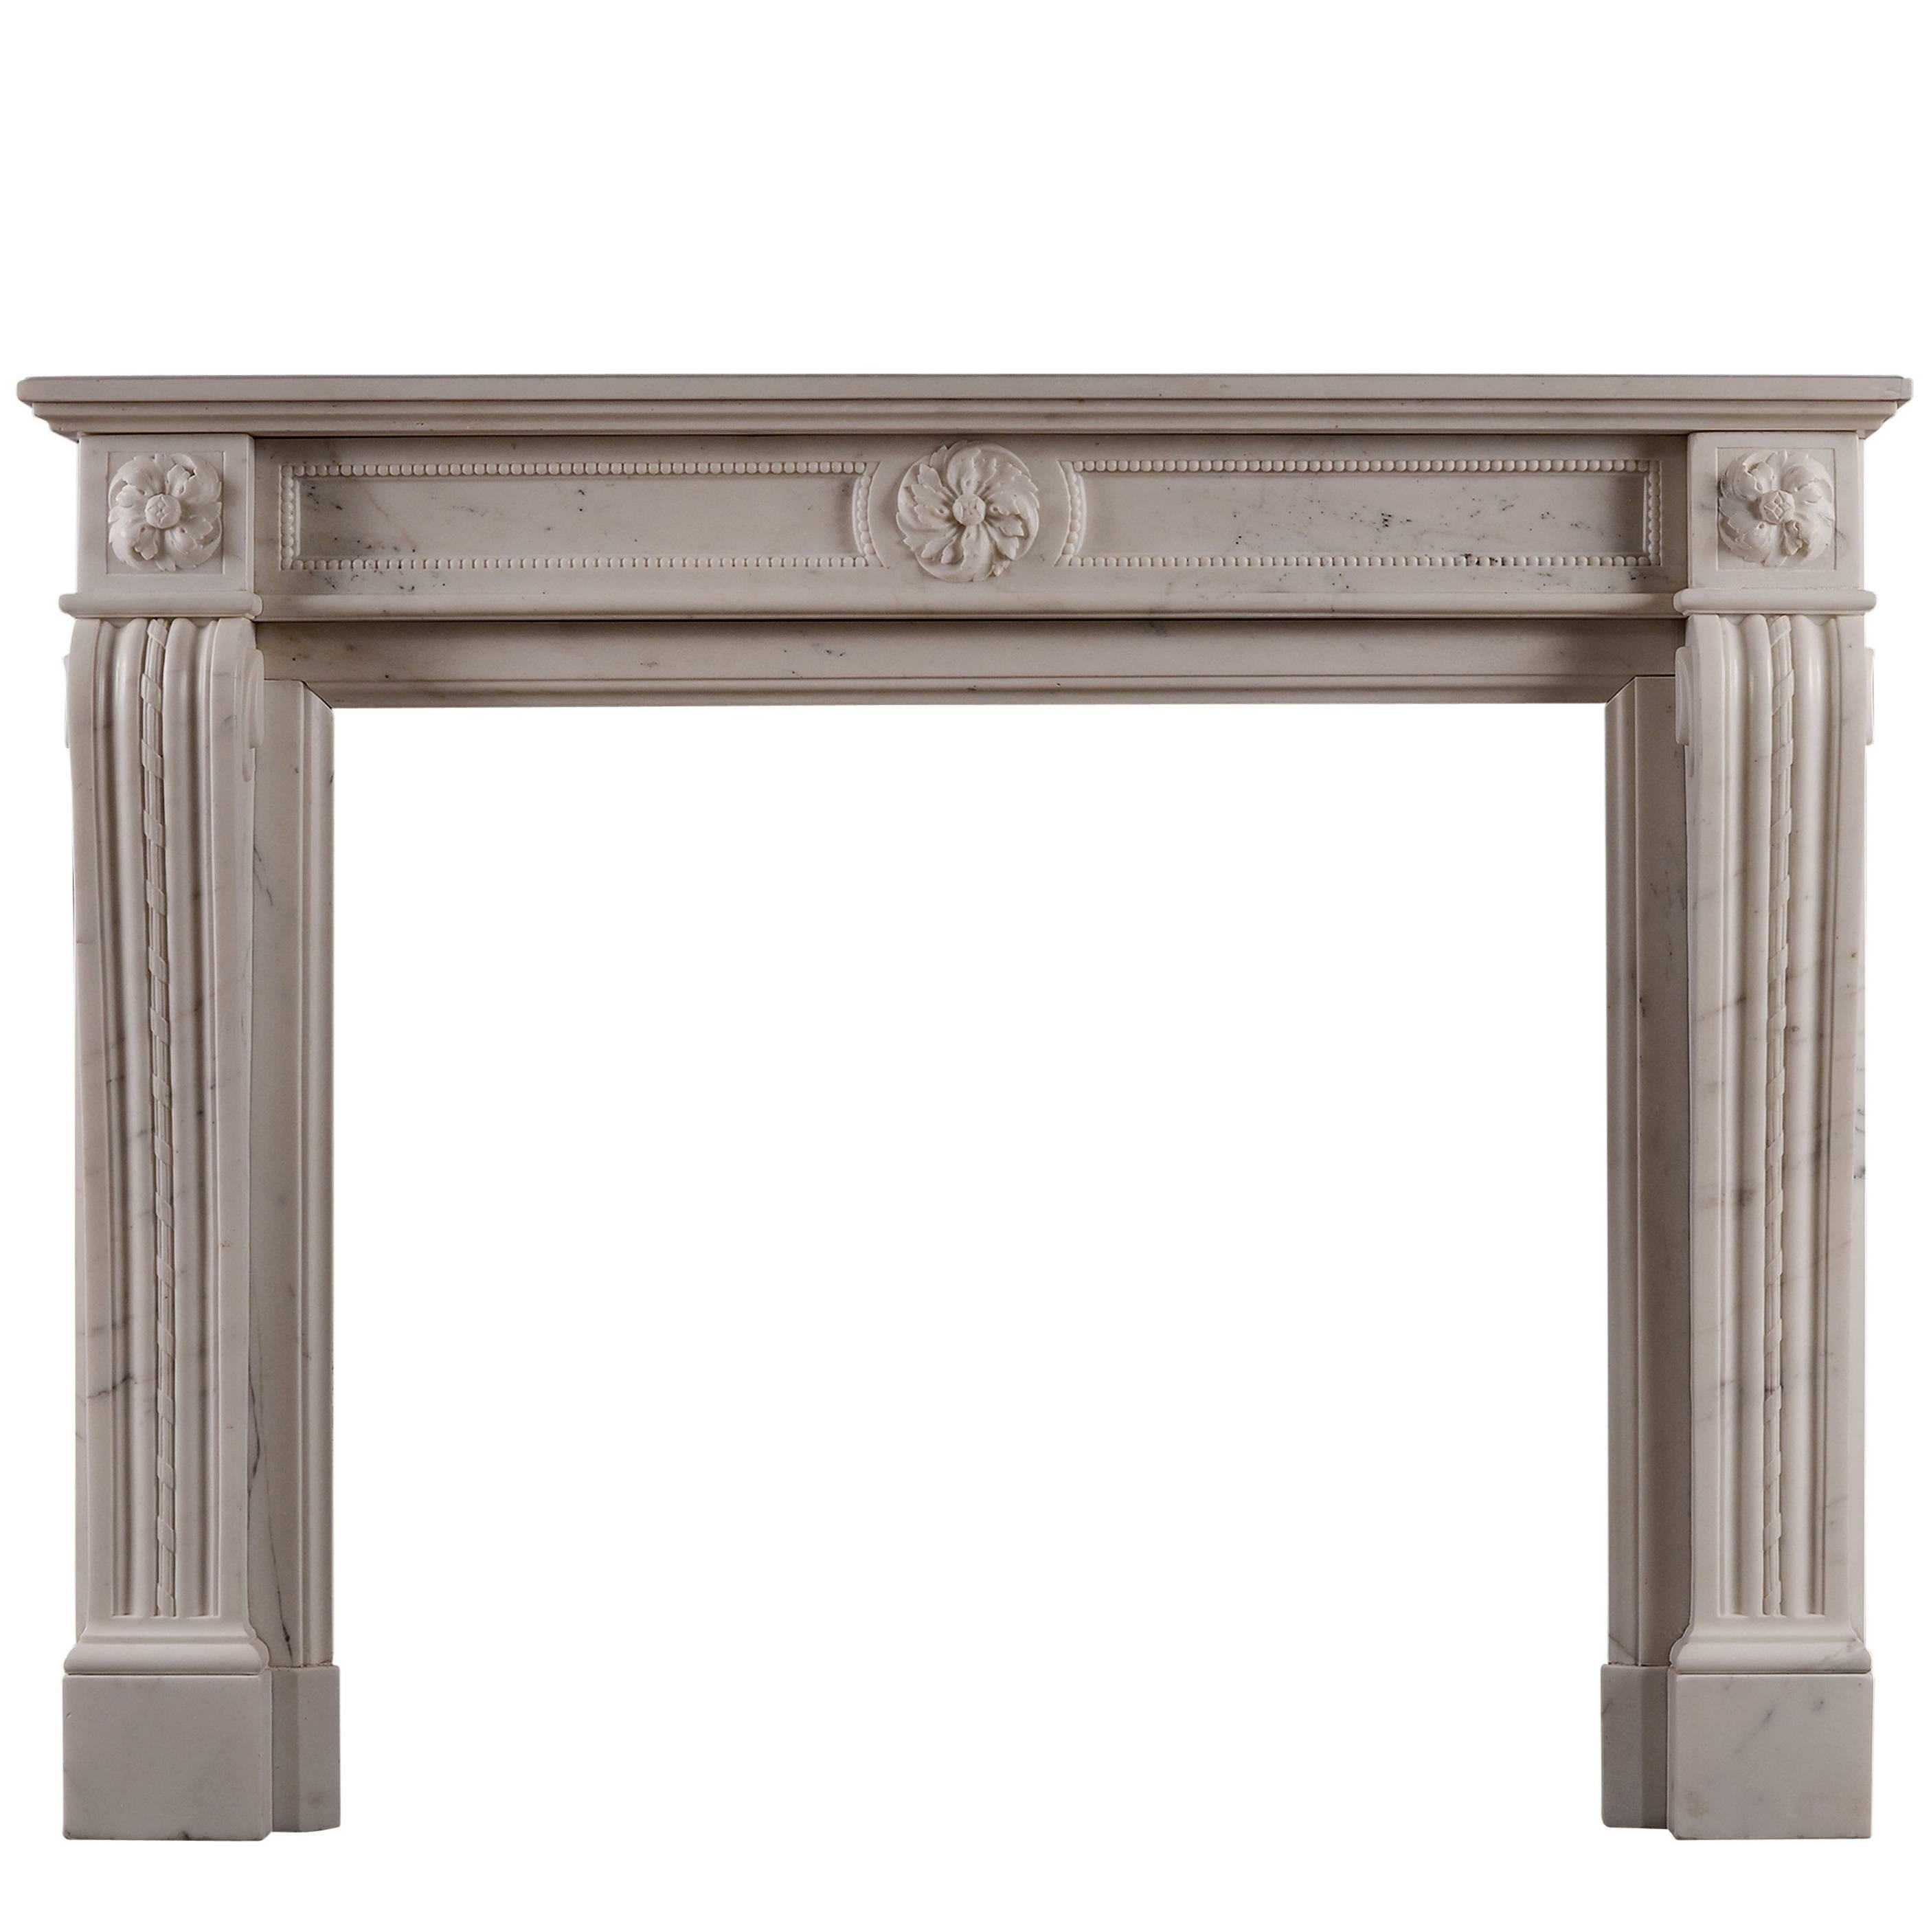 Statuary Marble Antique Fireplace in the Louis XVI Manner